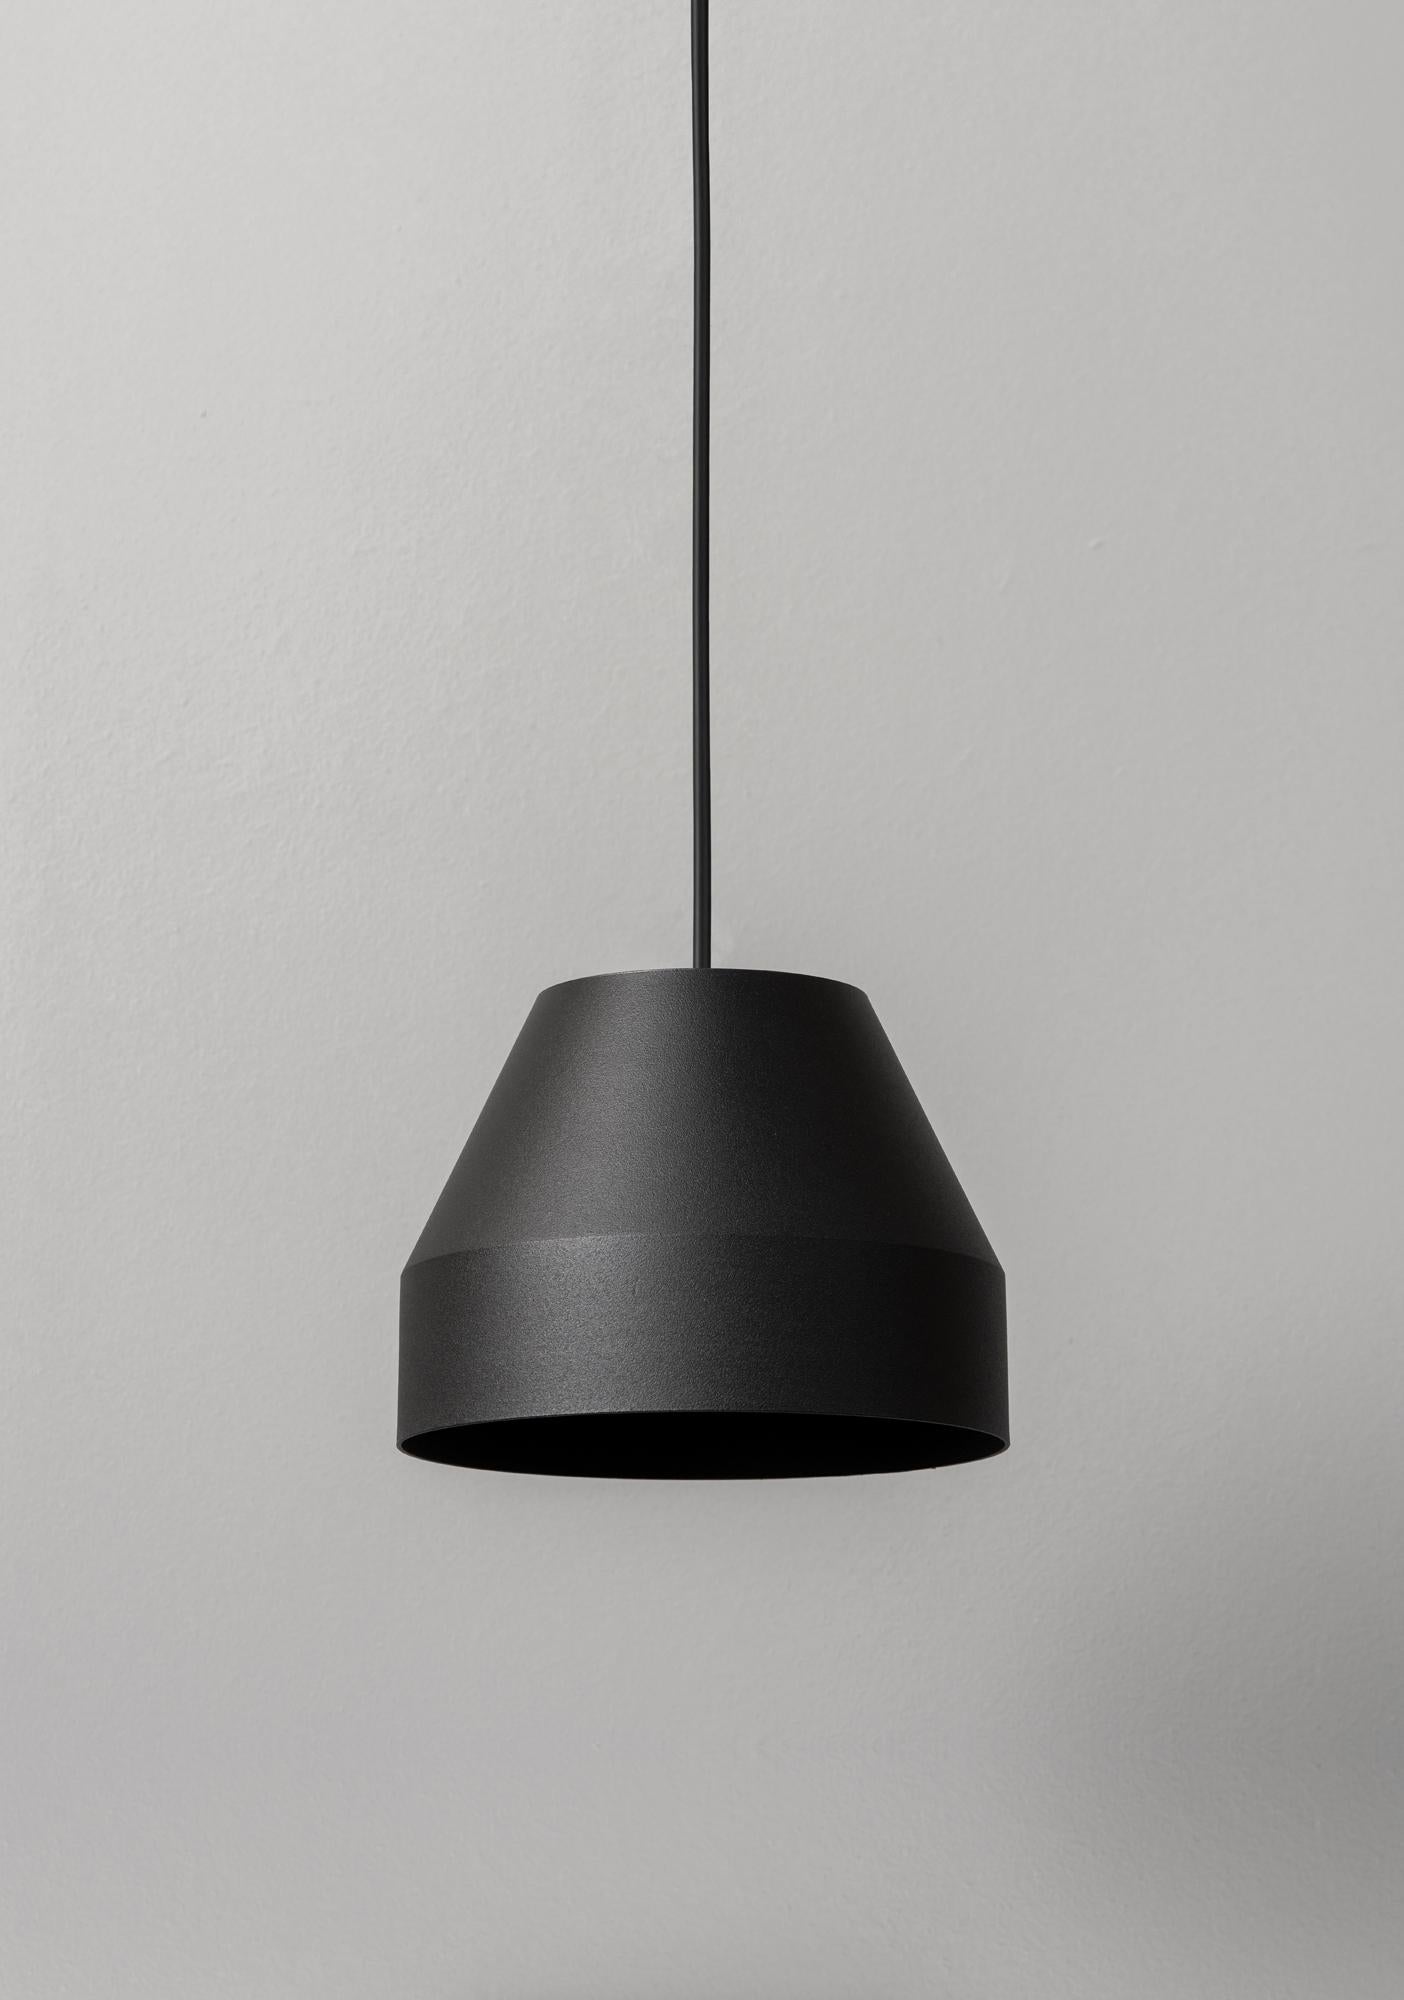 Small Black Cap Pendant Lamp by +kouple
Dimensions: Ø 16 x H 12 cm. 
Materials: Powder-coated steel.

Available in different color options. The rod length is 200 cm. Please contact us.

All our lamps can be wired according to each country. If sold